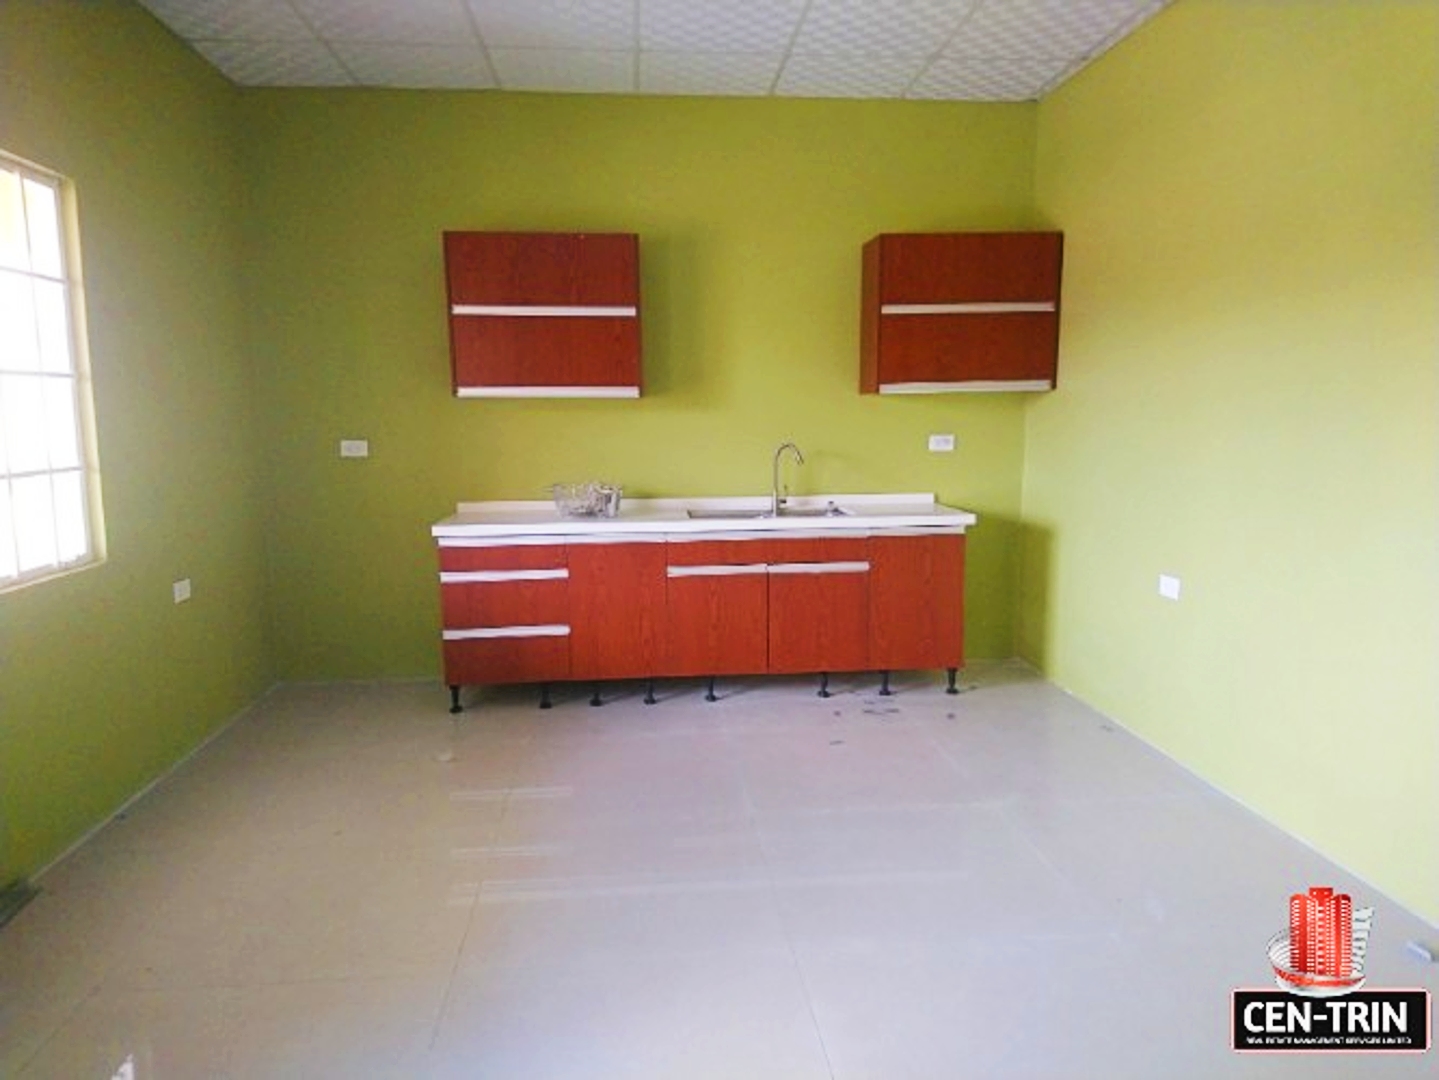 Apartments Chin Chin Road | A sample kitchen in an affordable two-bedroom apartment